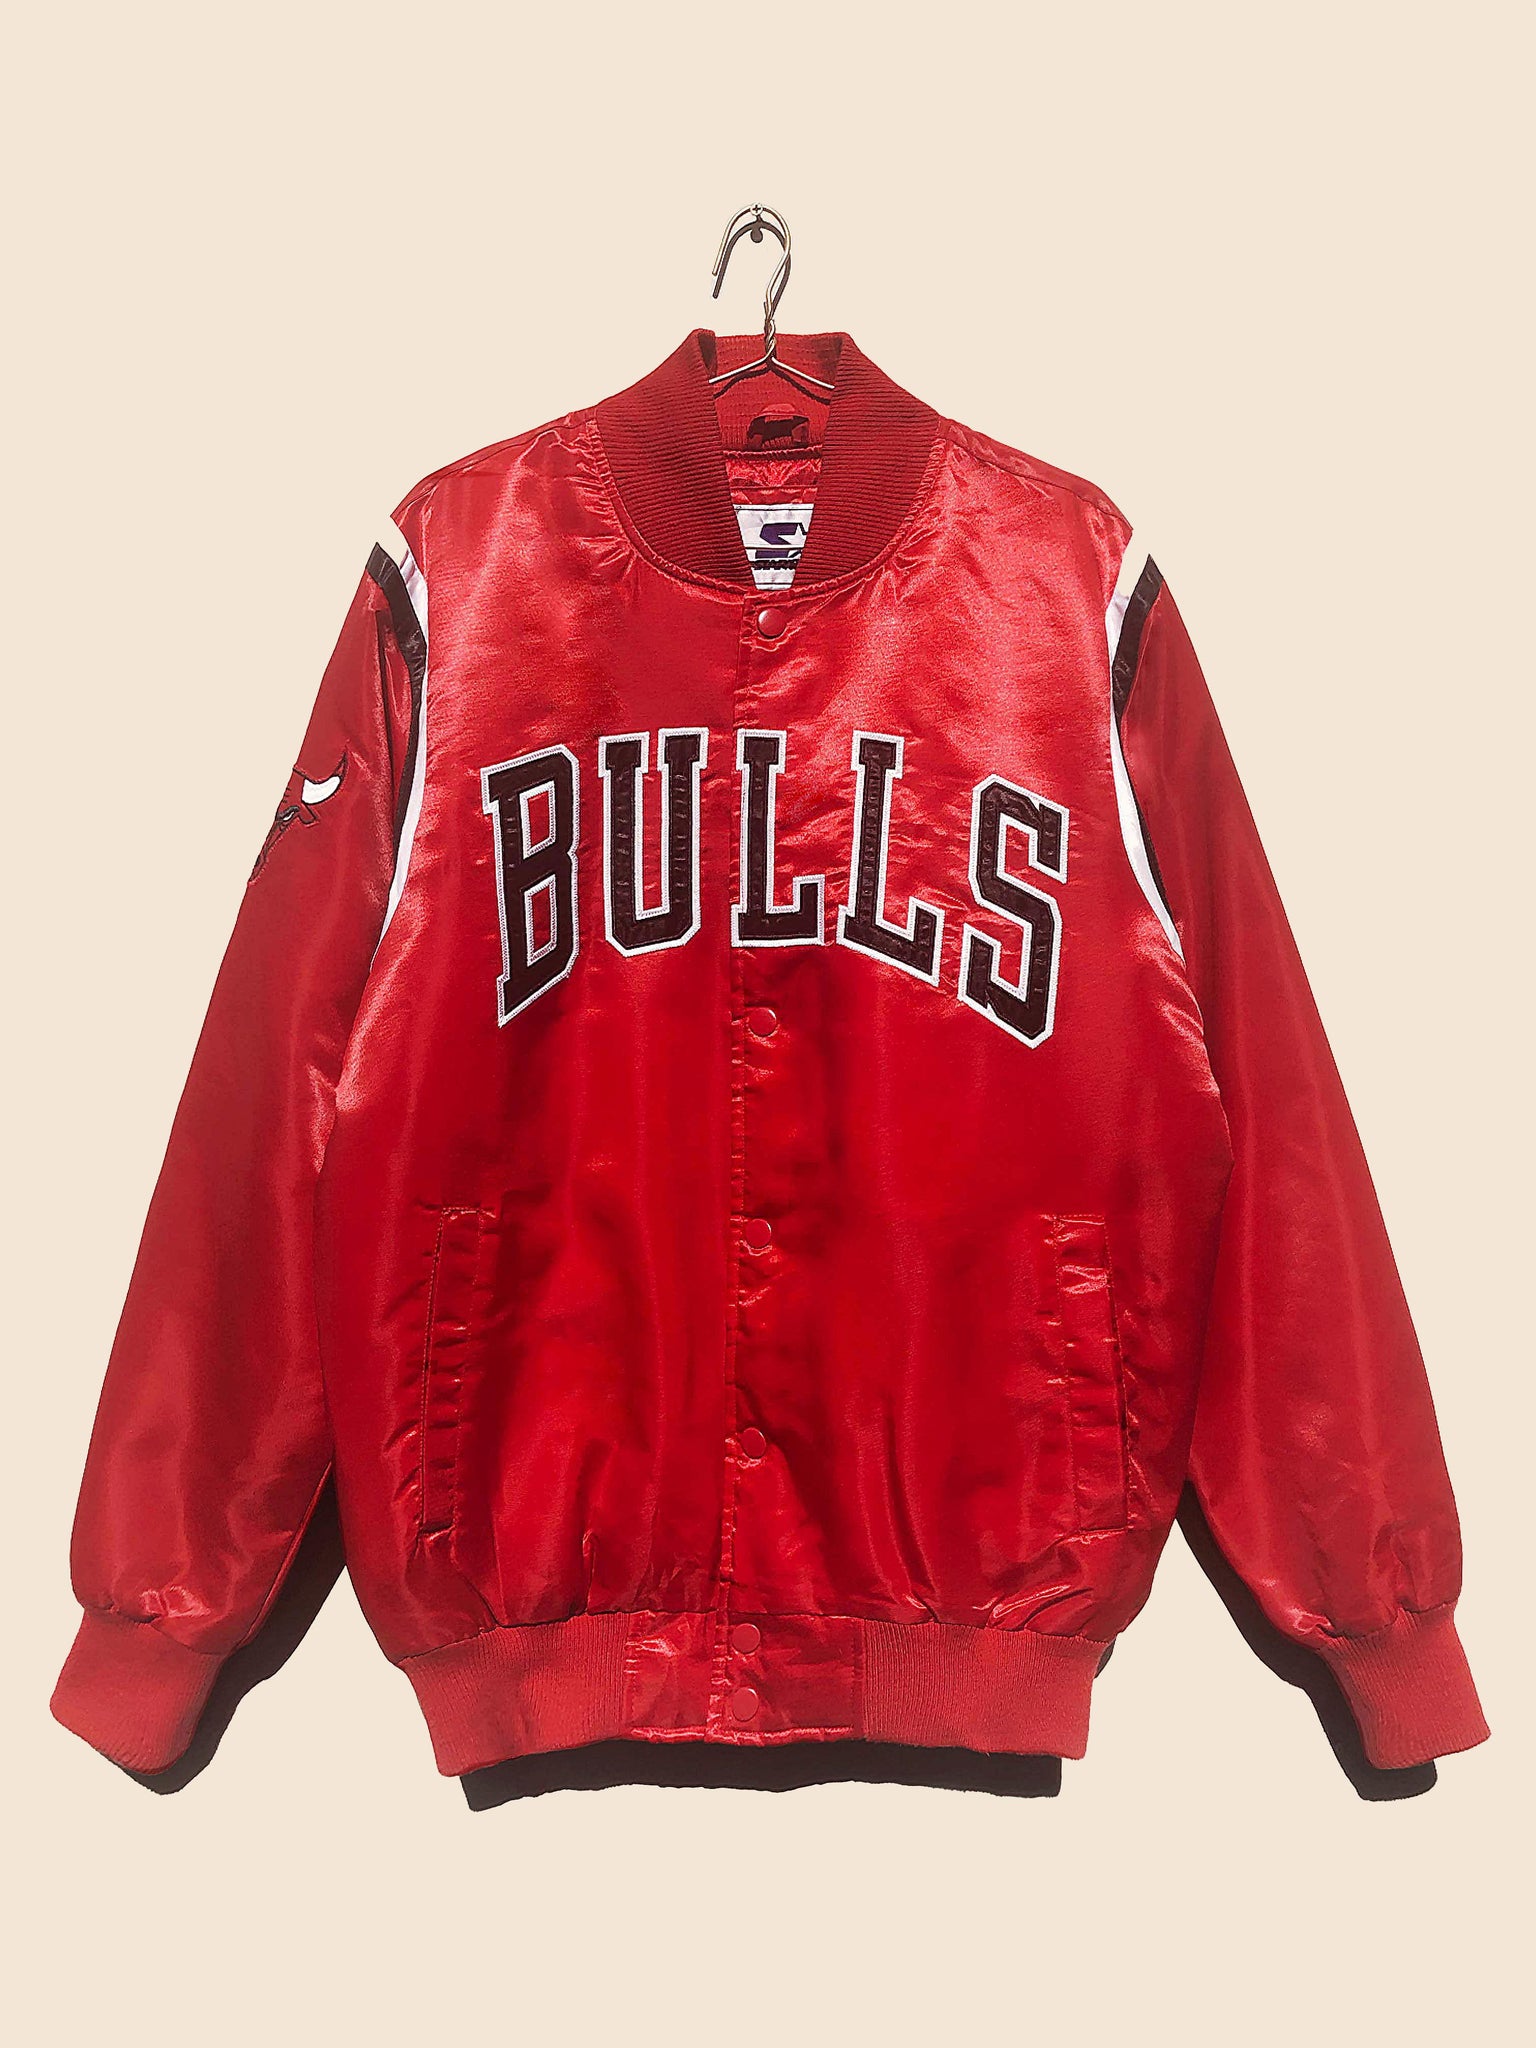 Vintage Chicago Bulls Bomber Leather Jacket- The American Outfit